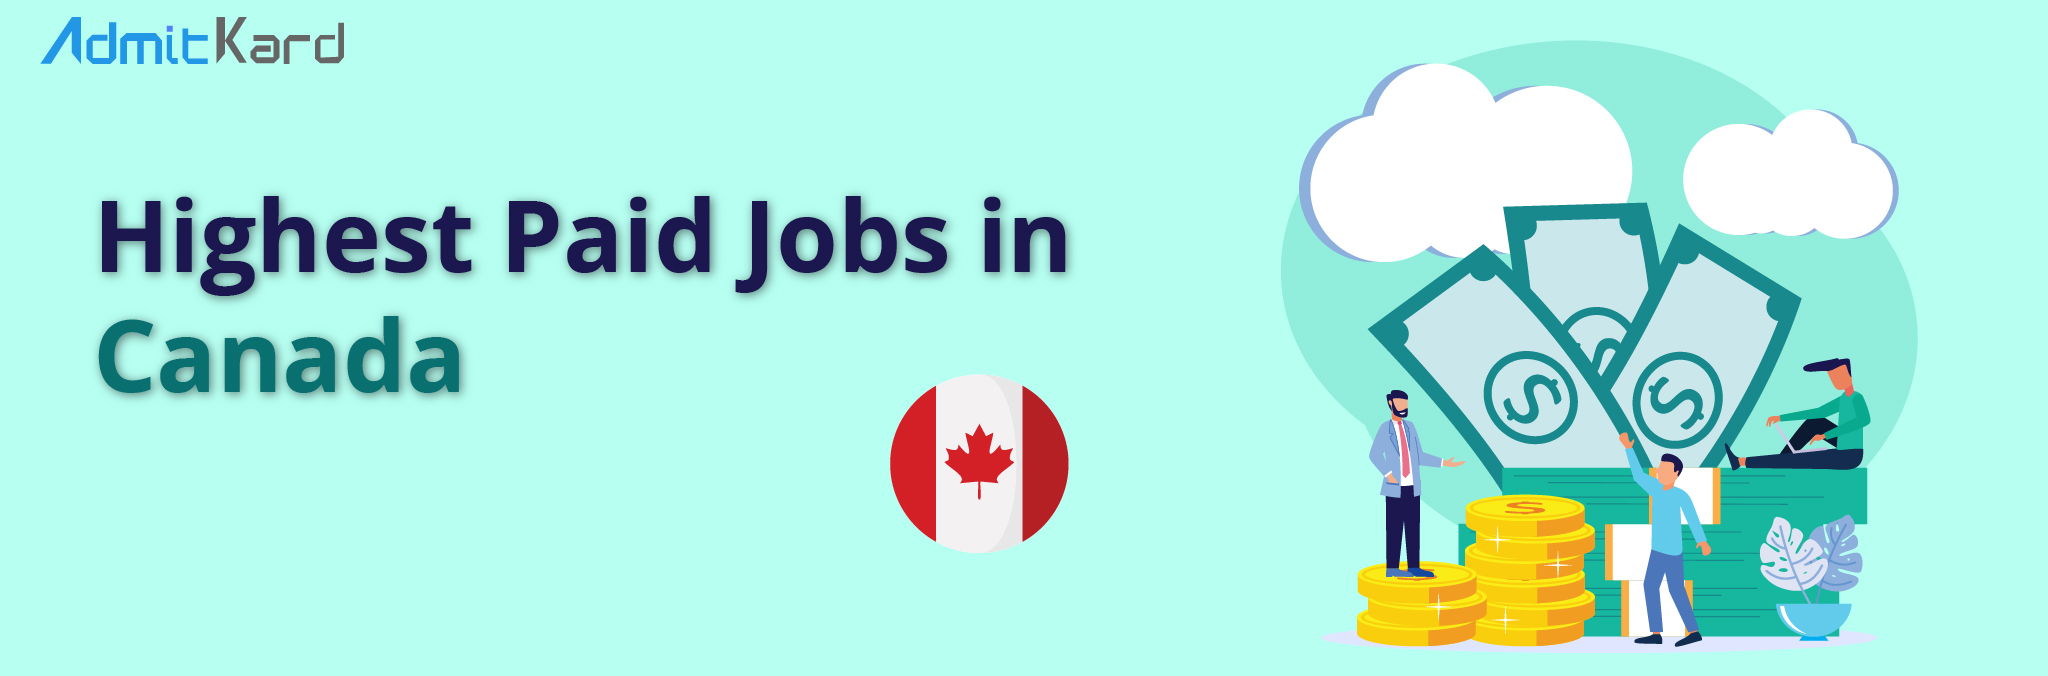 Highest paid jobs in Canada – Admitkard